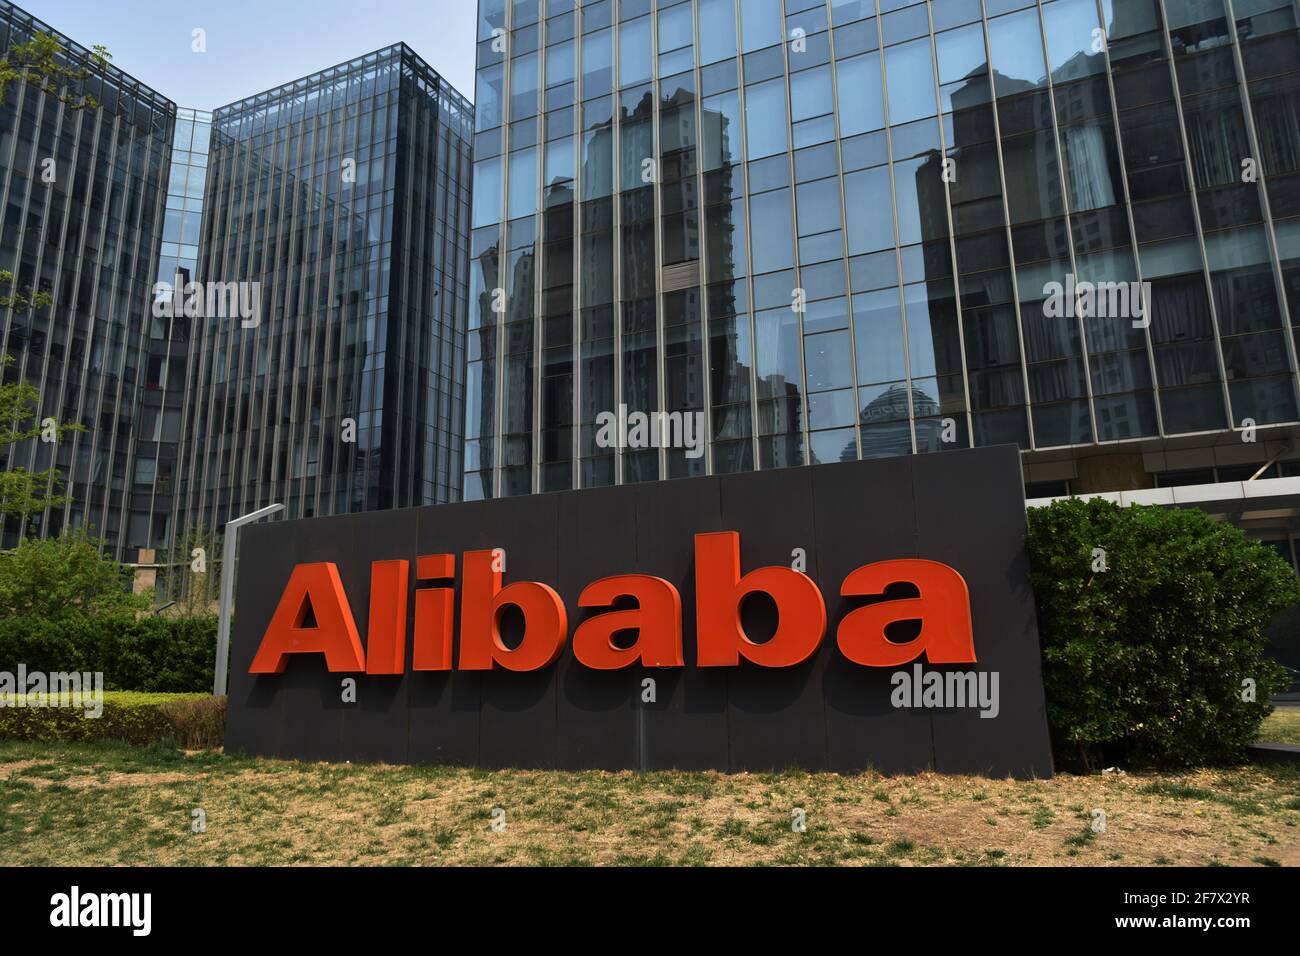 The Alibaba headquarters building in Beijing.The State Administration for Market Regulation of China slapped Alibaba with a hefty fine of nearly $2.8 billion for 'alternatively' monopolistic practices. Alibaba issued an open letter: punishment is a wake-up call and spur, will create a more open platform environment. Stock Photo